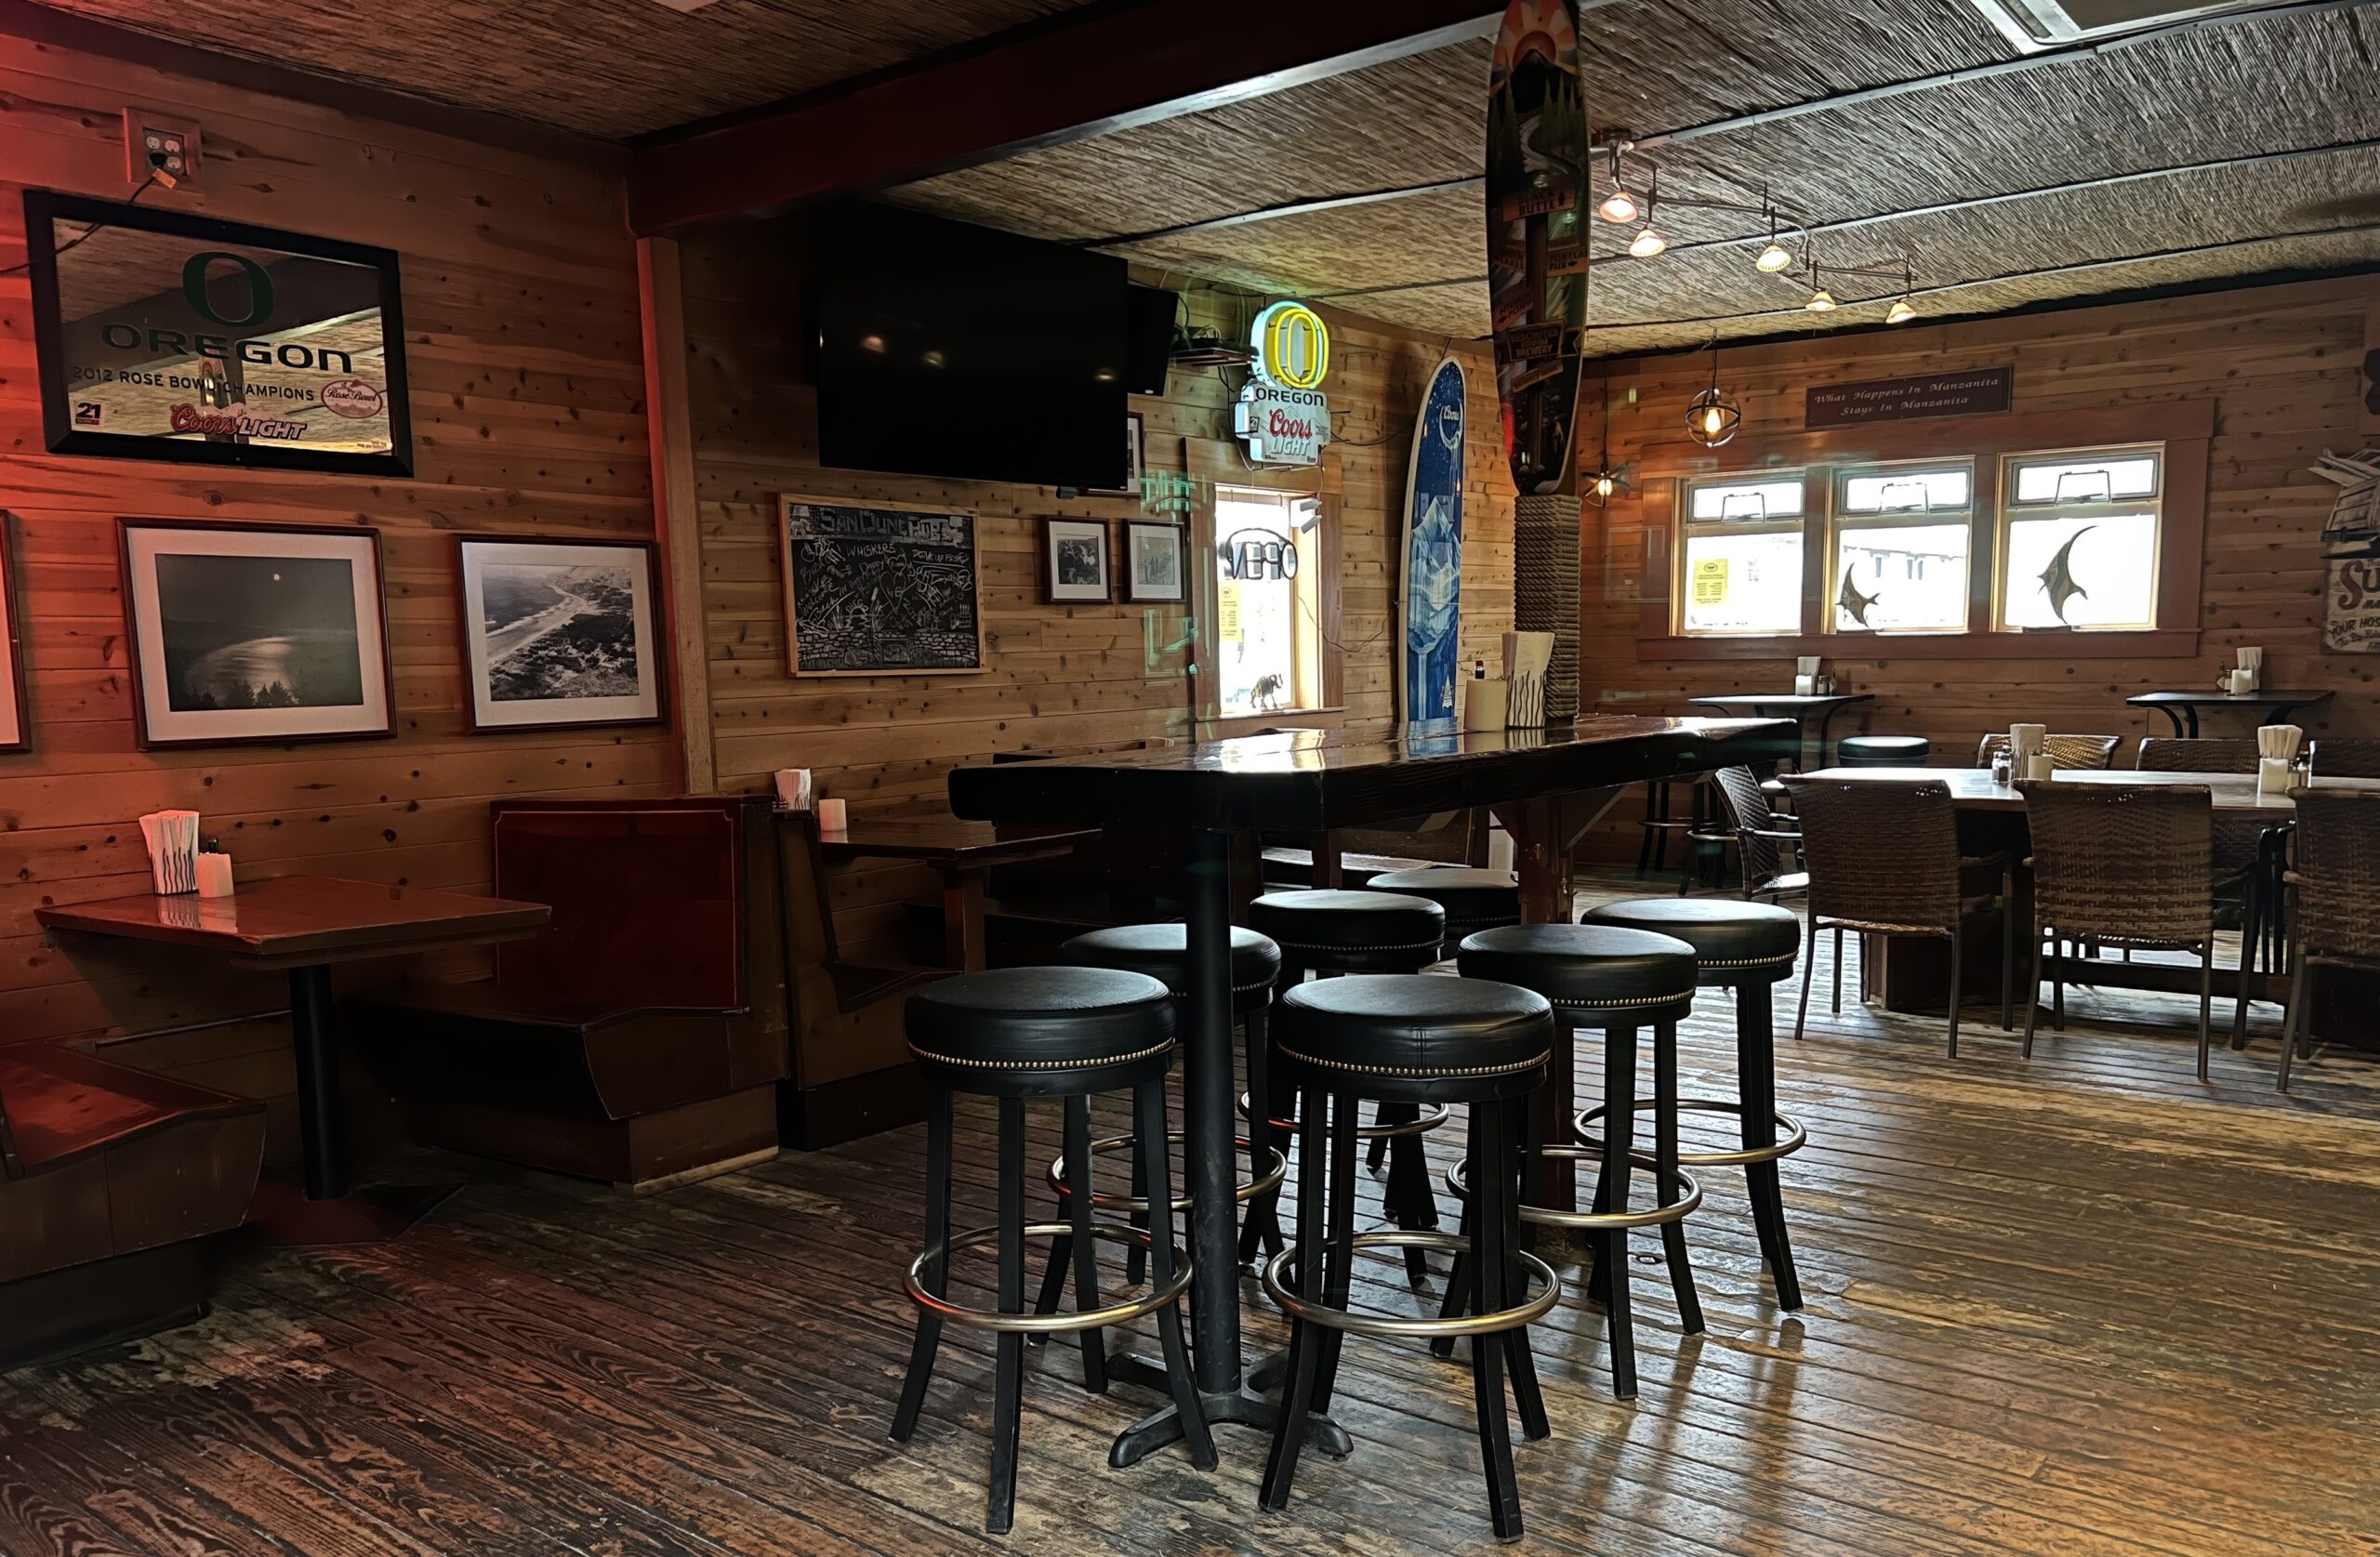 The San Dune Pub is For Sale